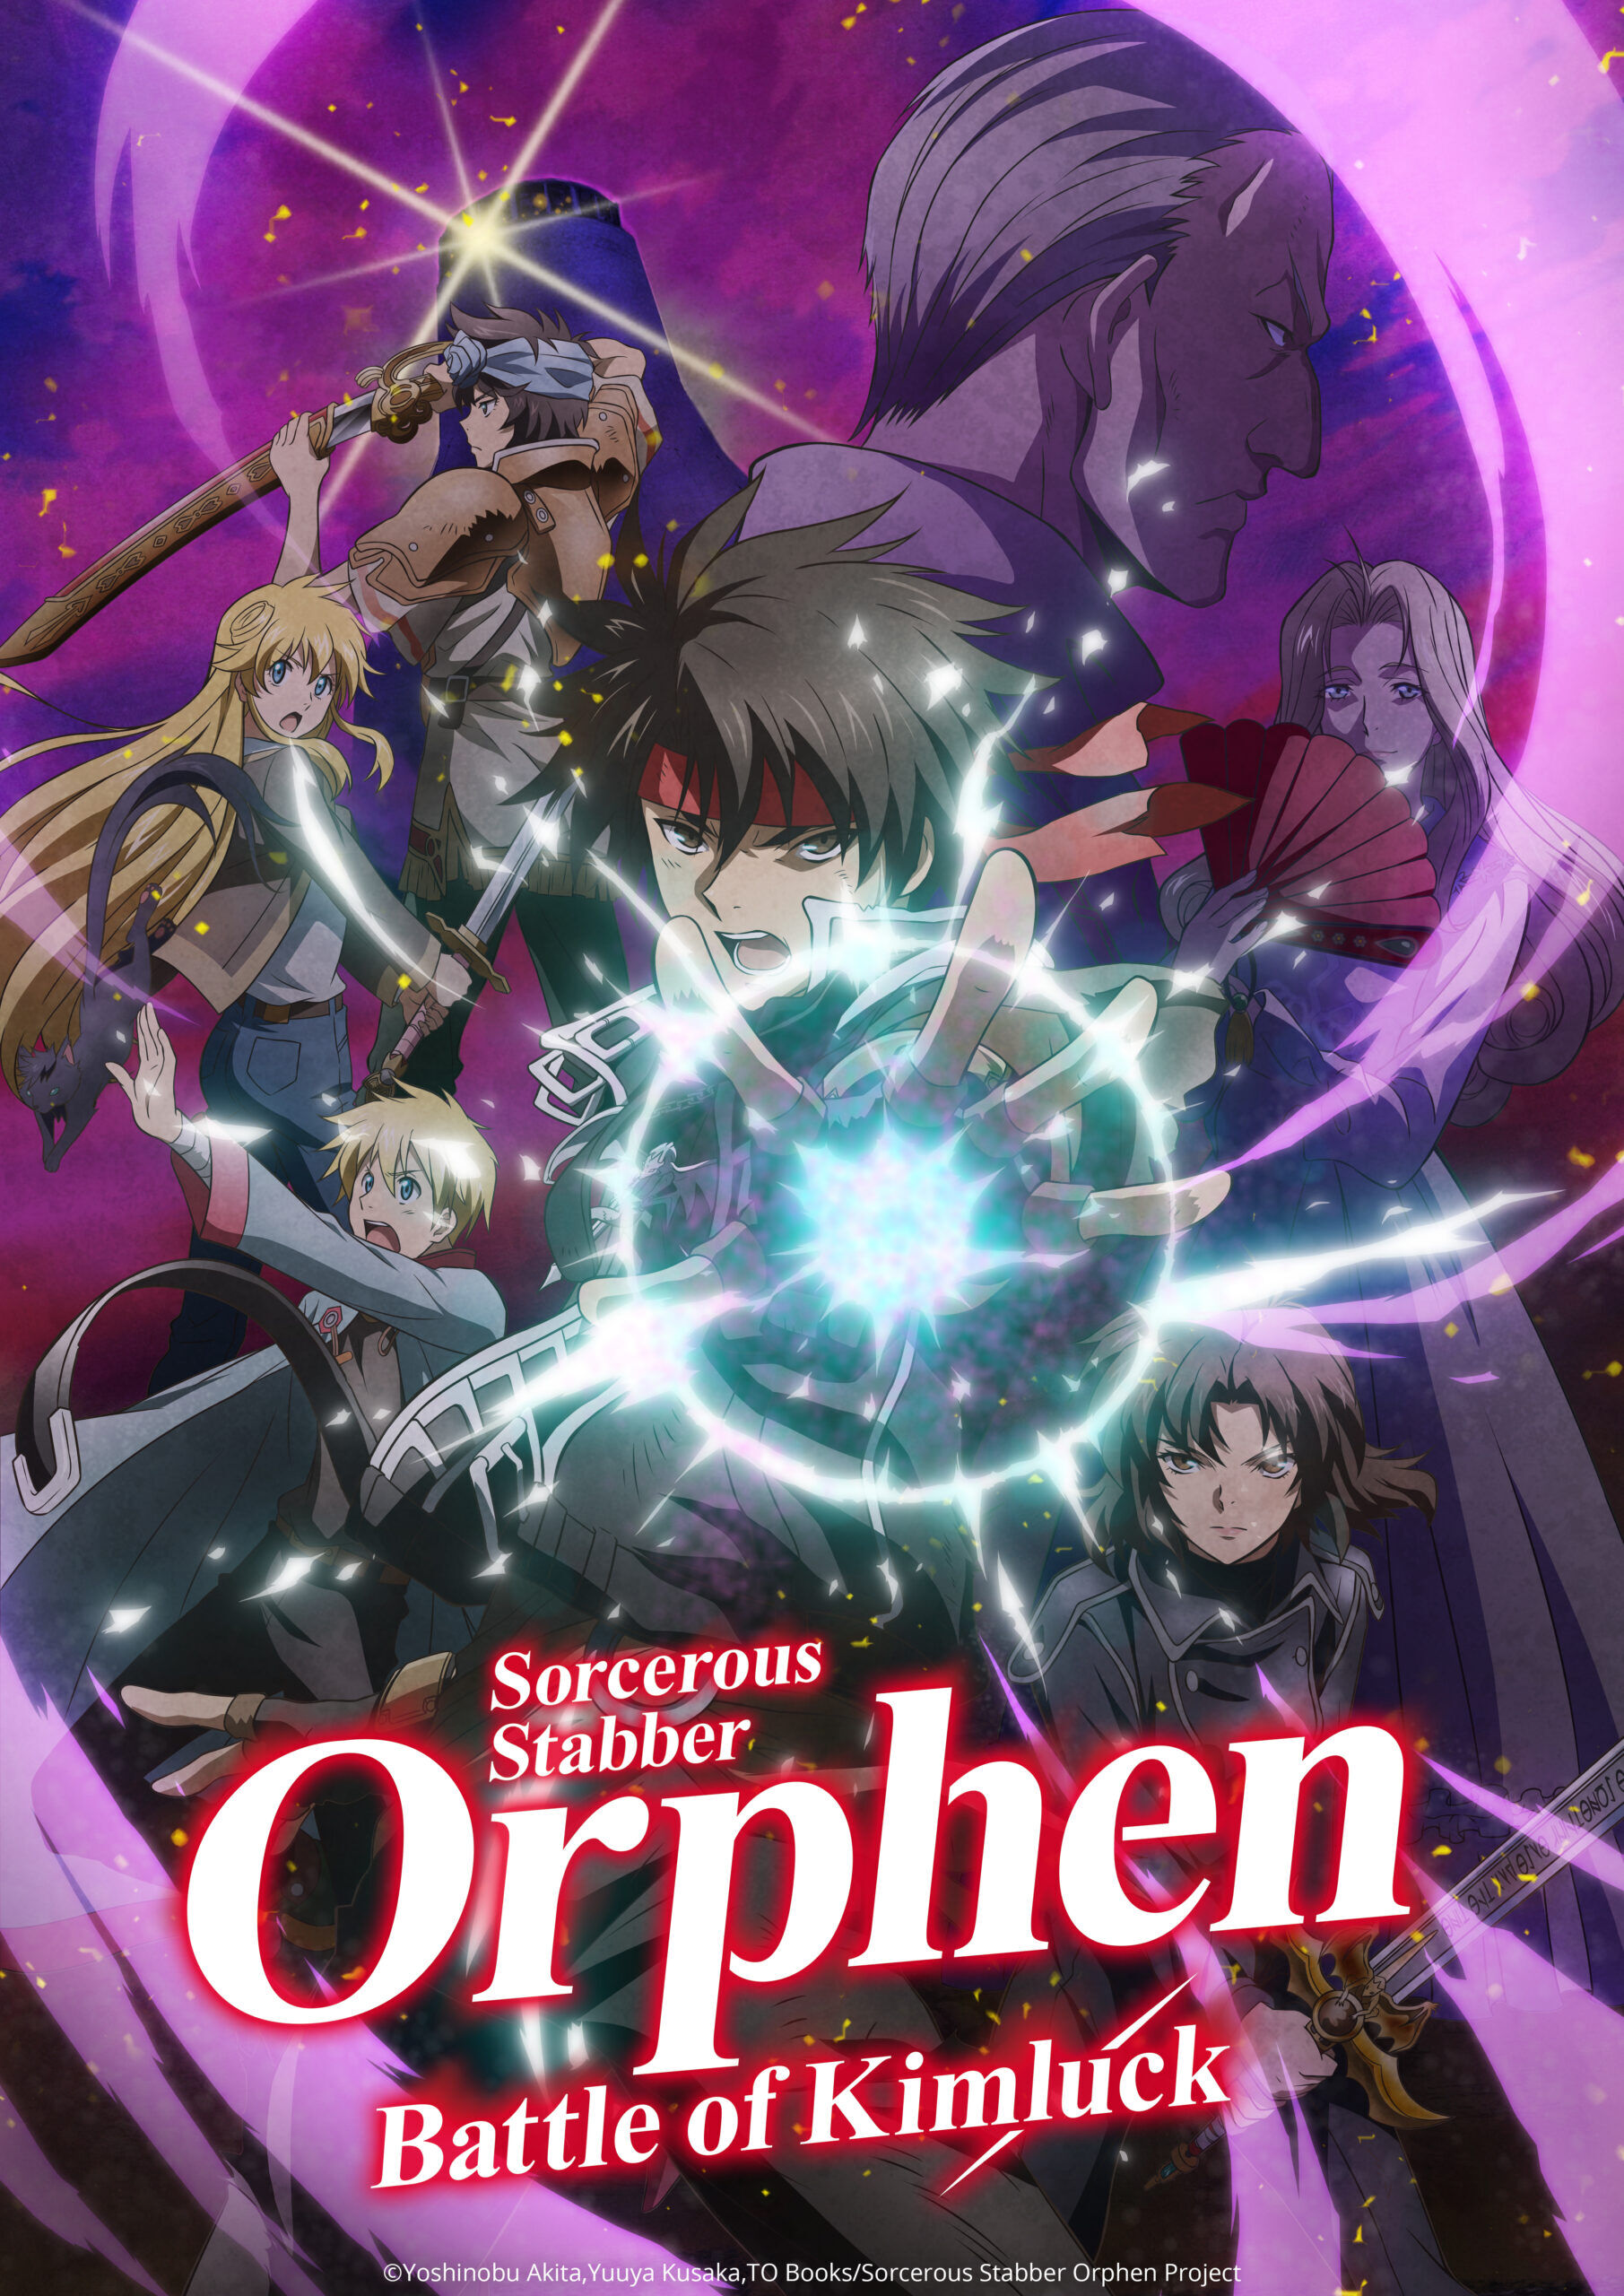 Sorcerous Stabber Orphen Reveals New Trailer Recapping First Two